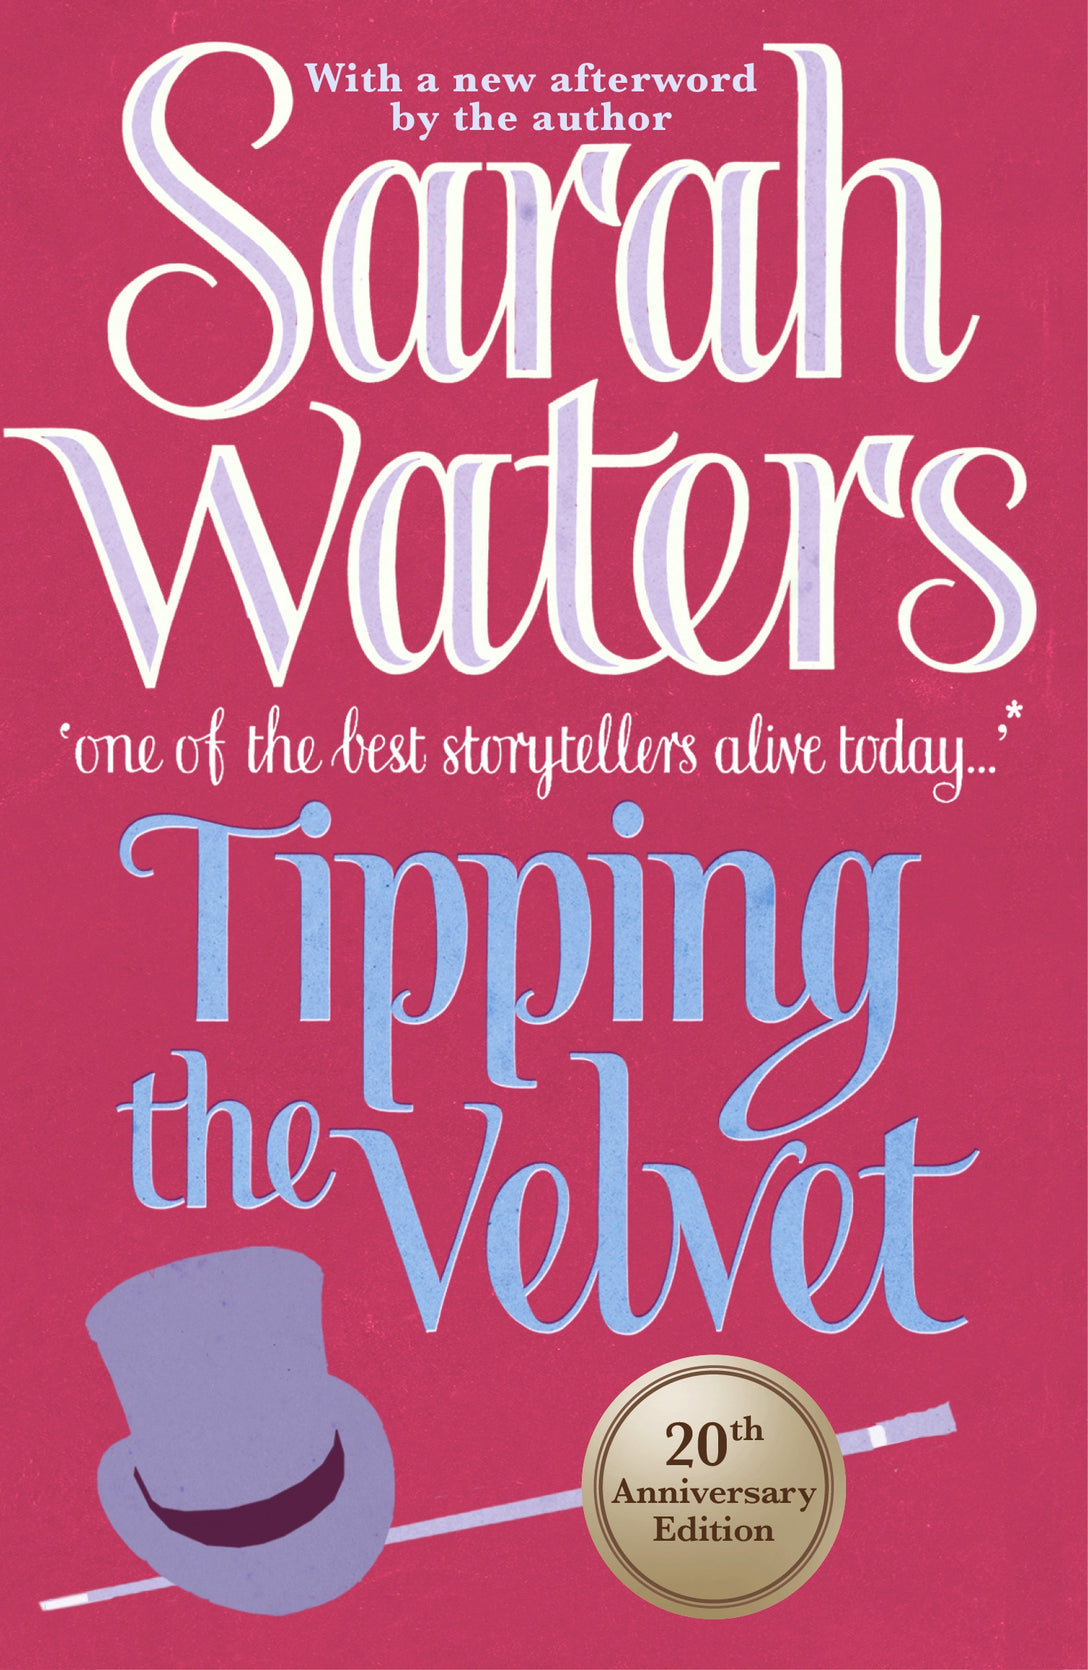 Tipping The Velvet by Sarah Waters